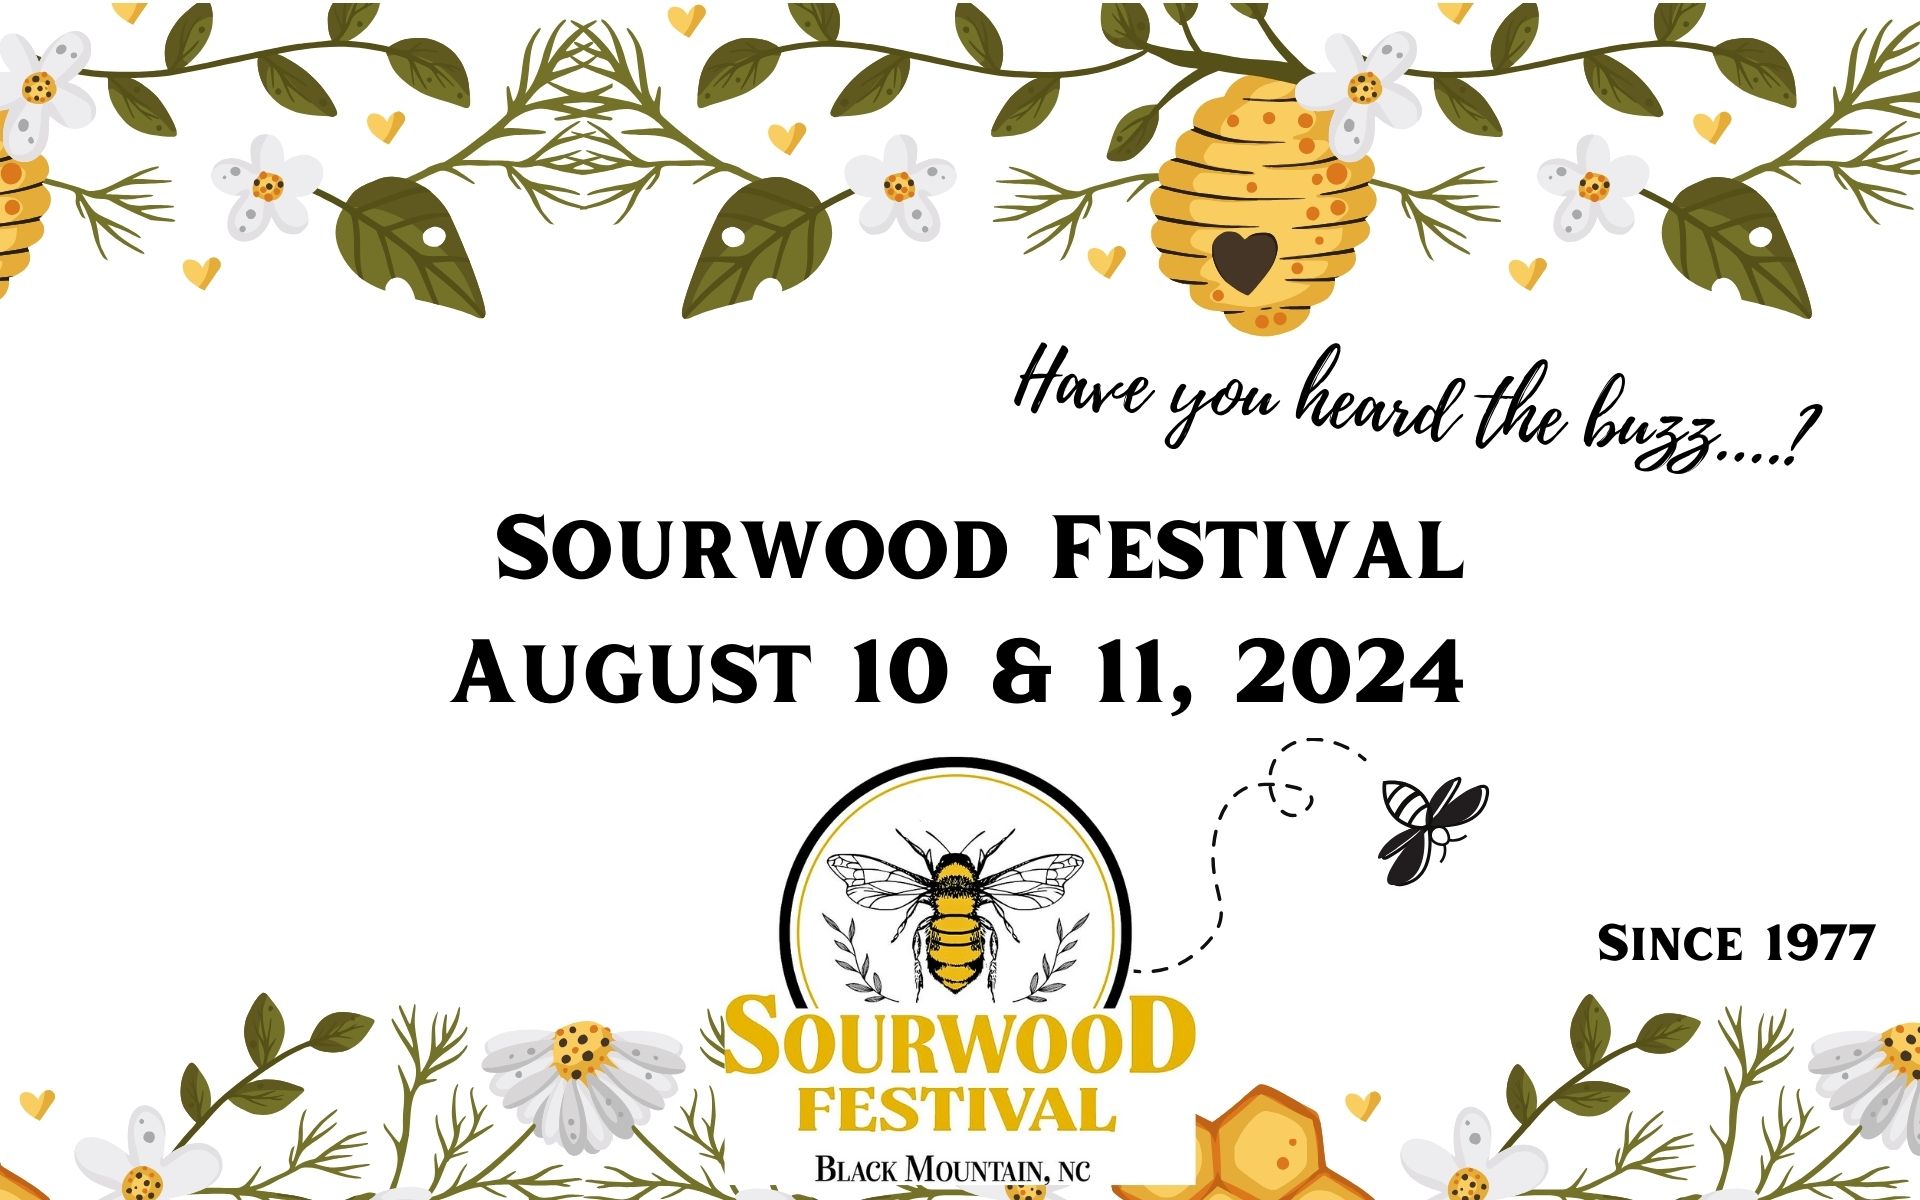 Sourwood Festival Black Mountain and Swannanoa Chamber of Commerce